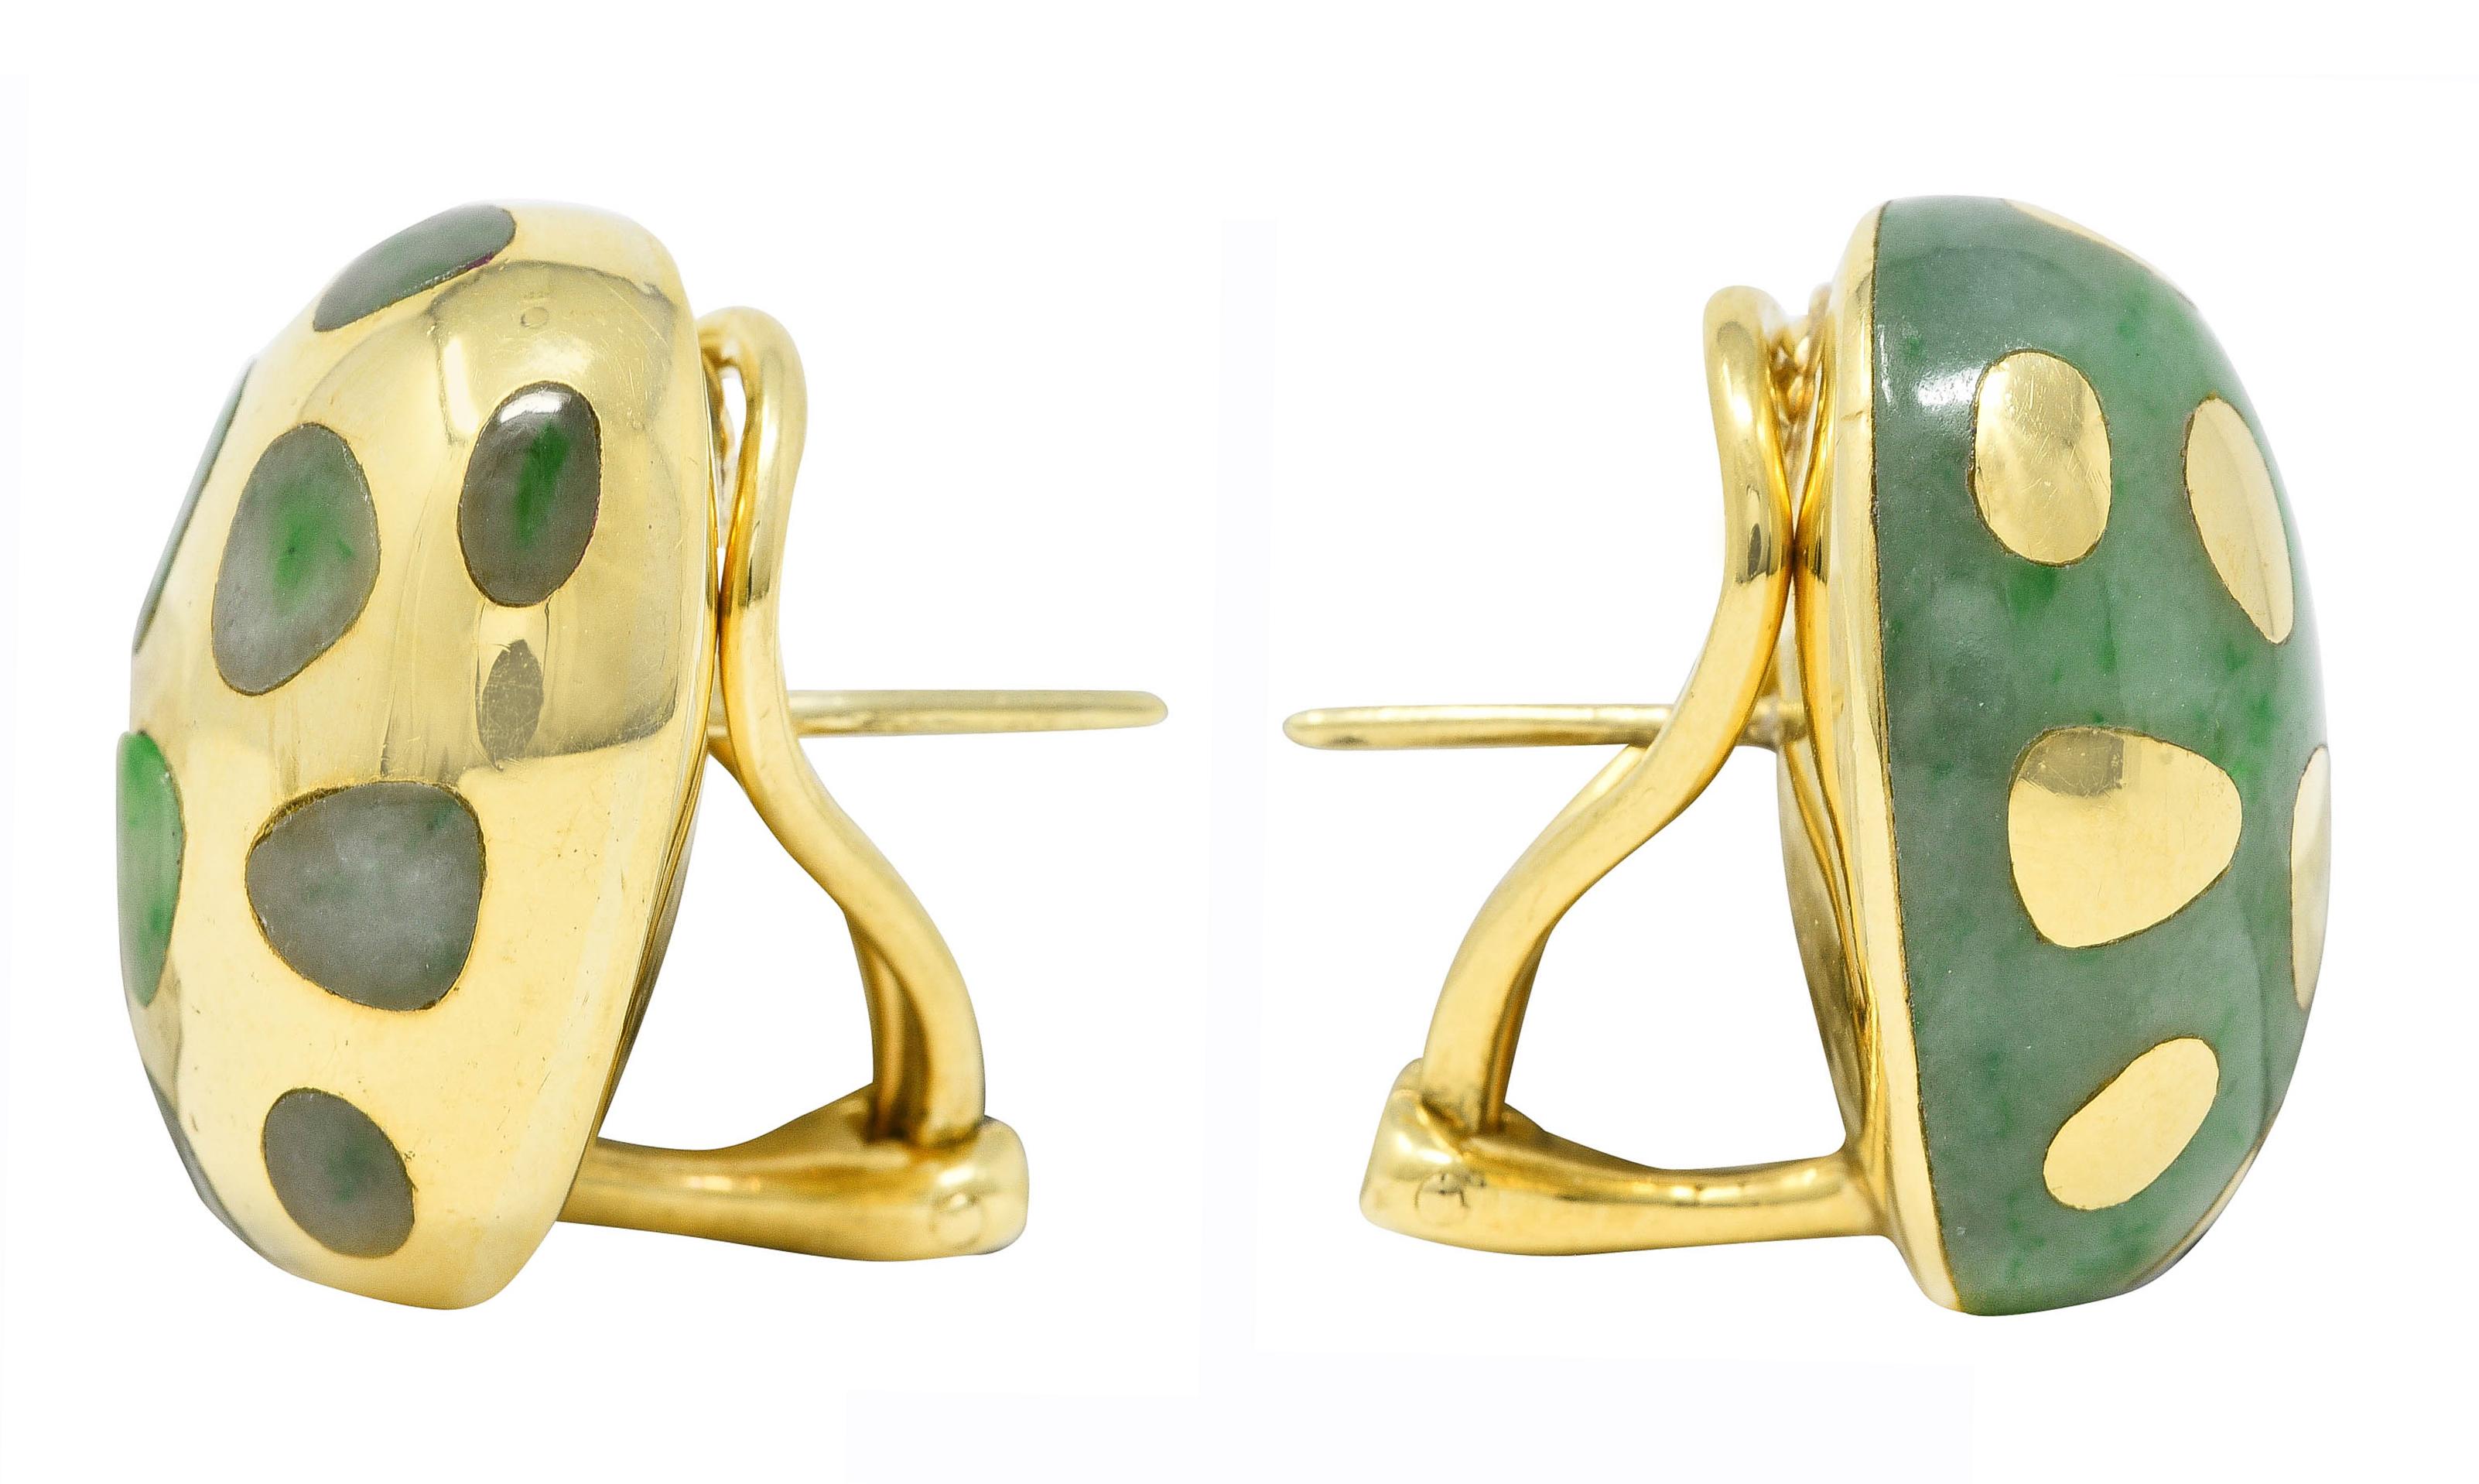 Earrings are designed as oval forms - one made of jade and the other made of gold

With a contrasting spot pattern of either jade or gold inlaid throughout

Jade is opaque pastel green with bright green mottling

With high polished gold